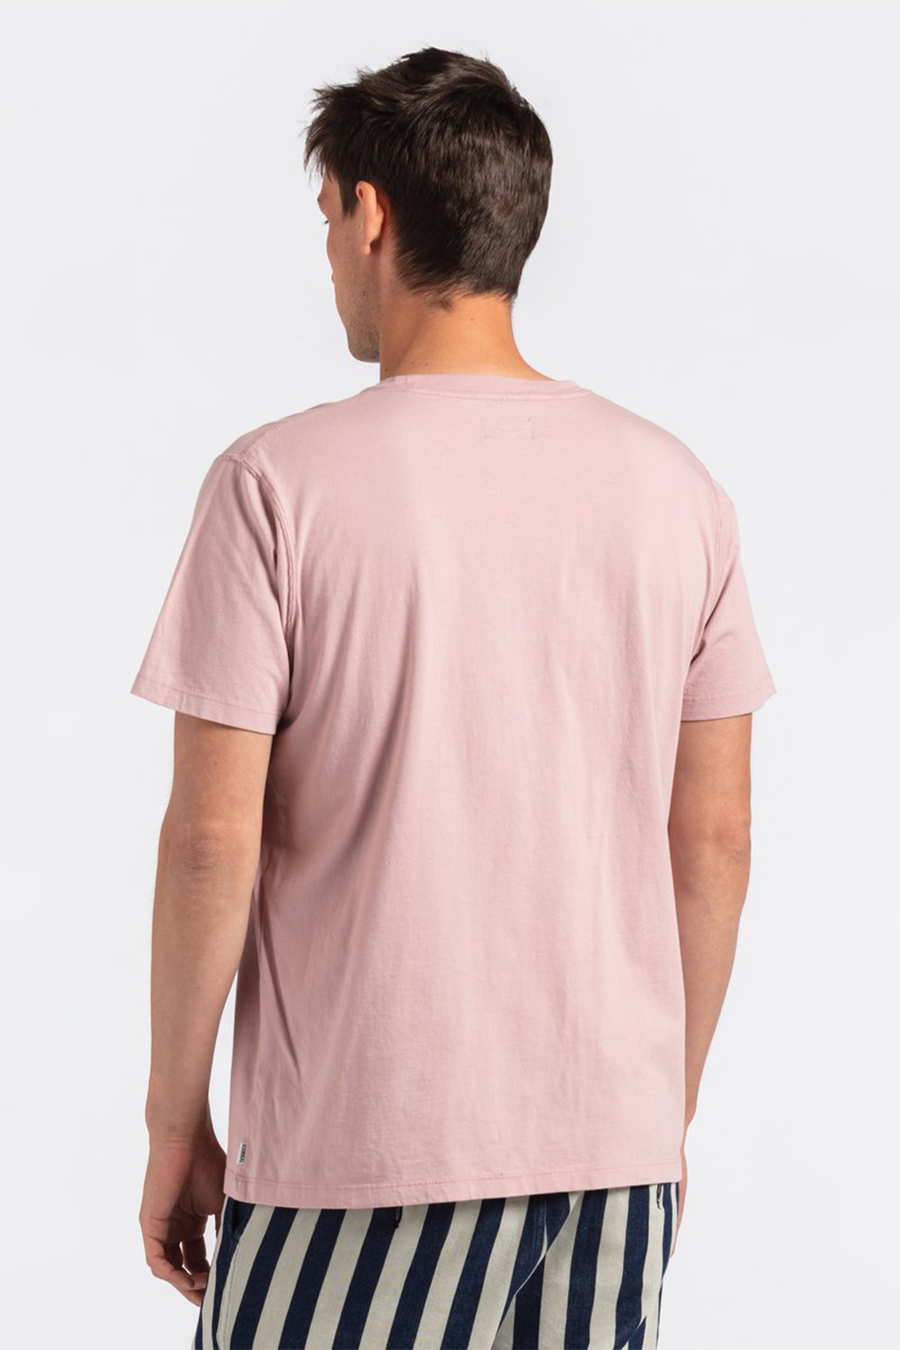 Label Classic Tee | Pale Lavender - Main Image Number 2 of 2